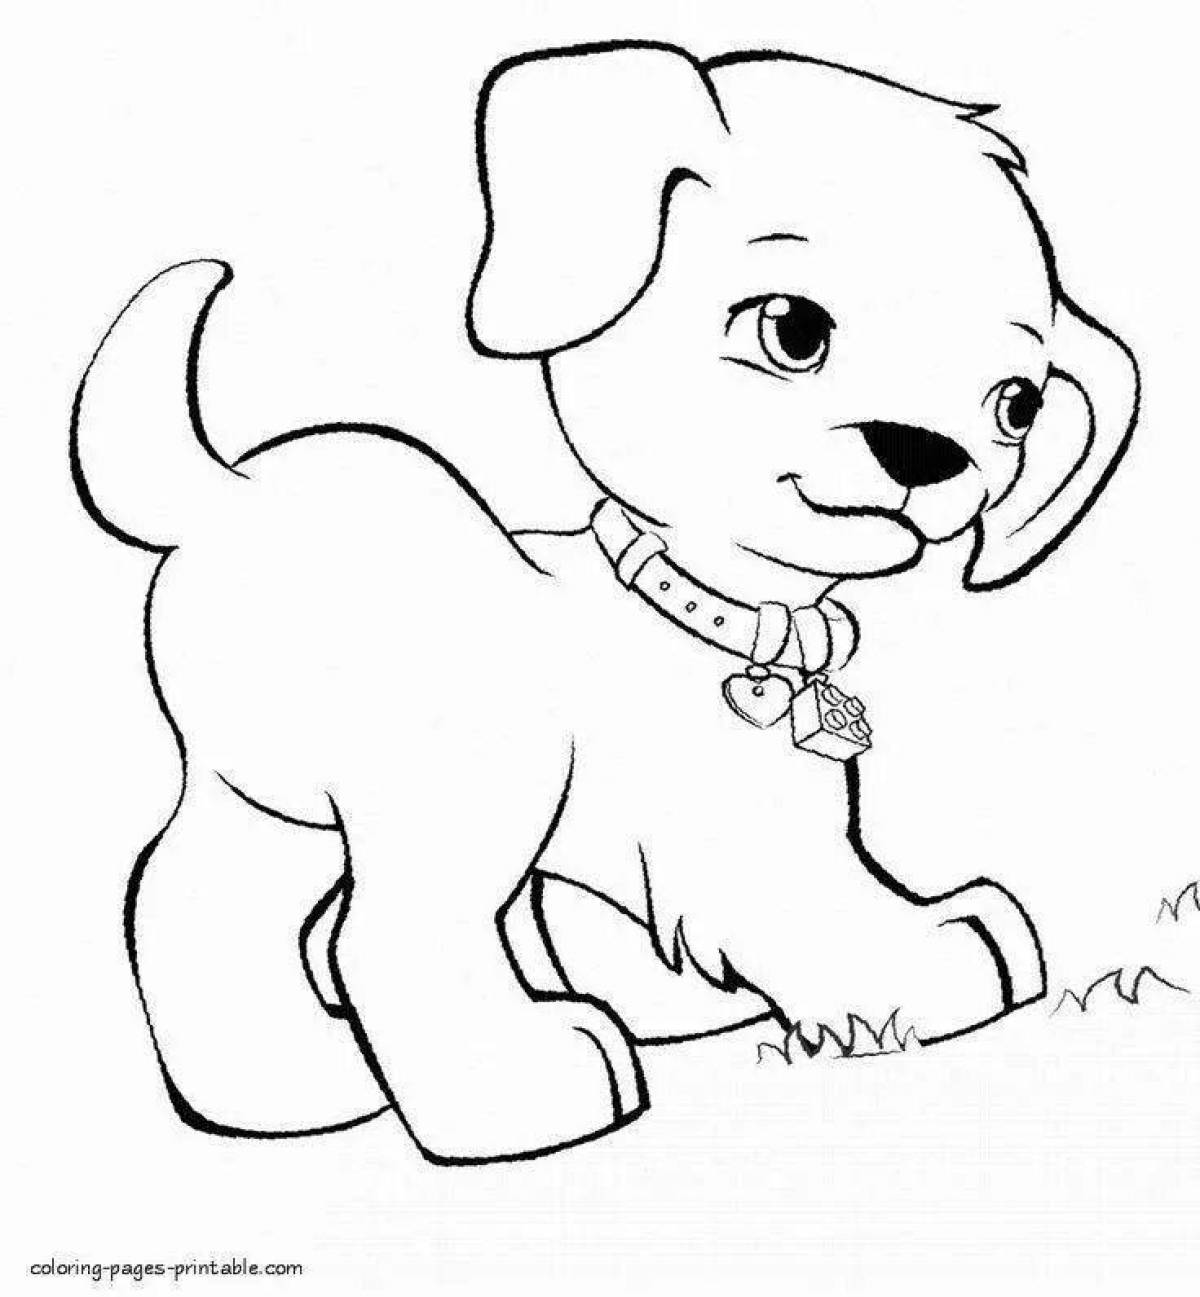 Glittering dog coloring page for girls